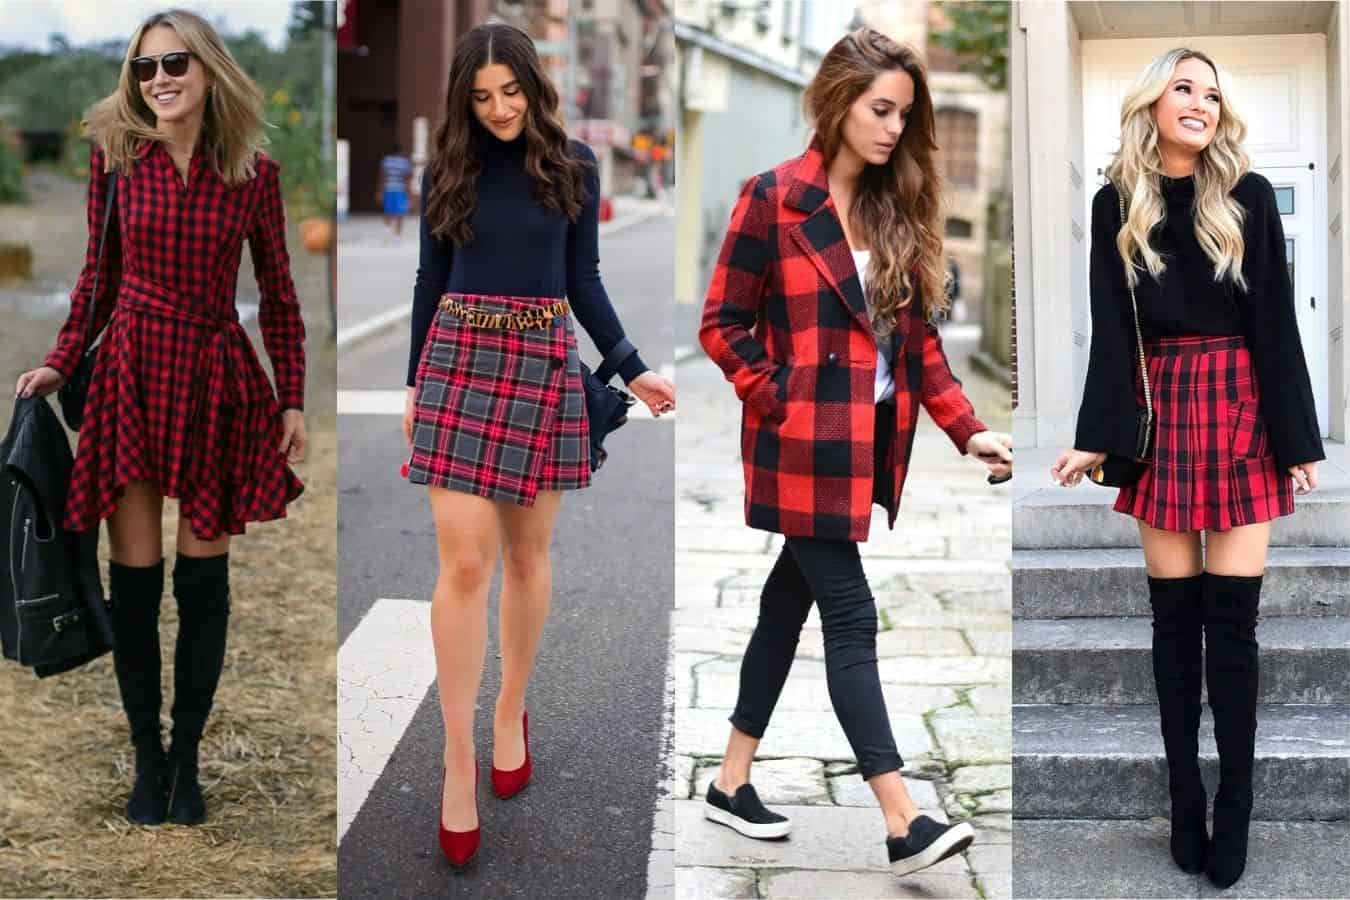 Red and plaid wear